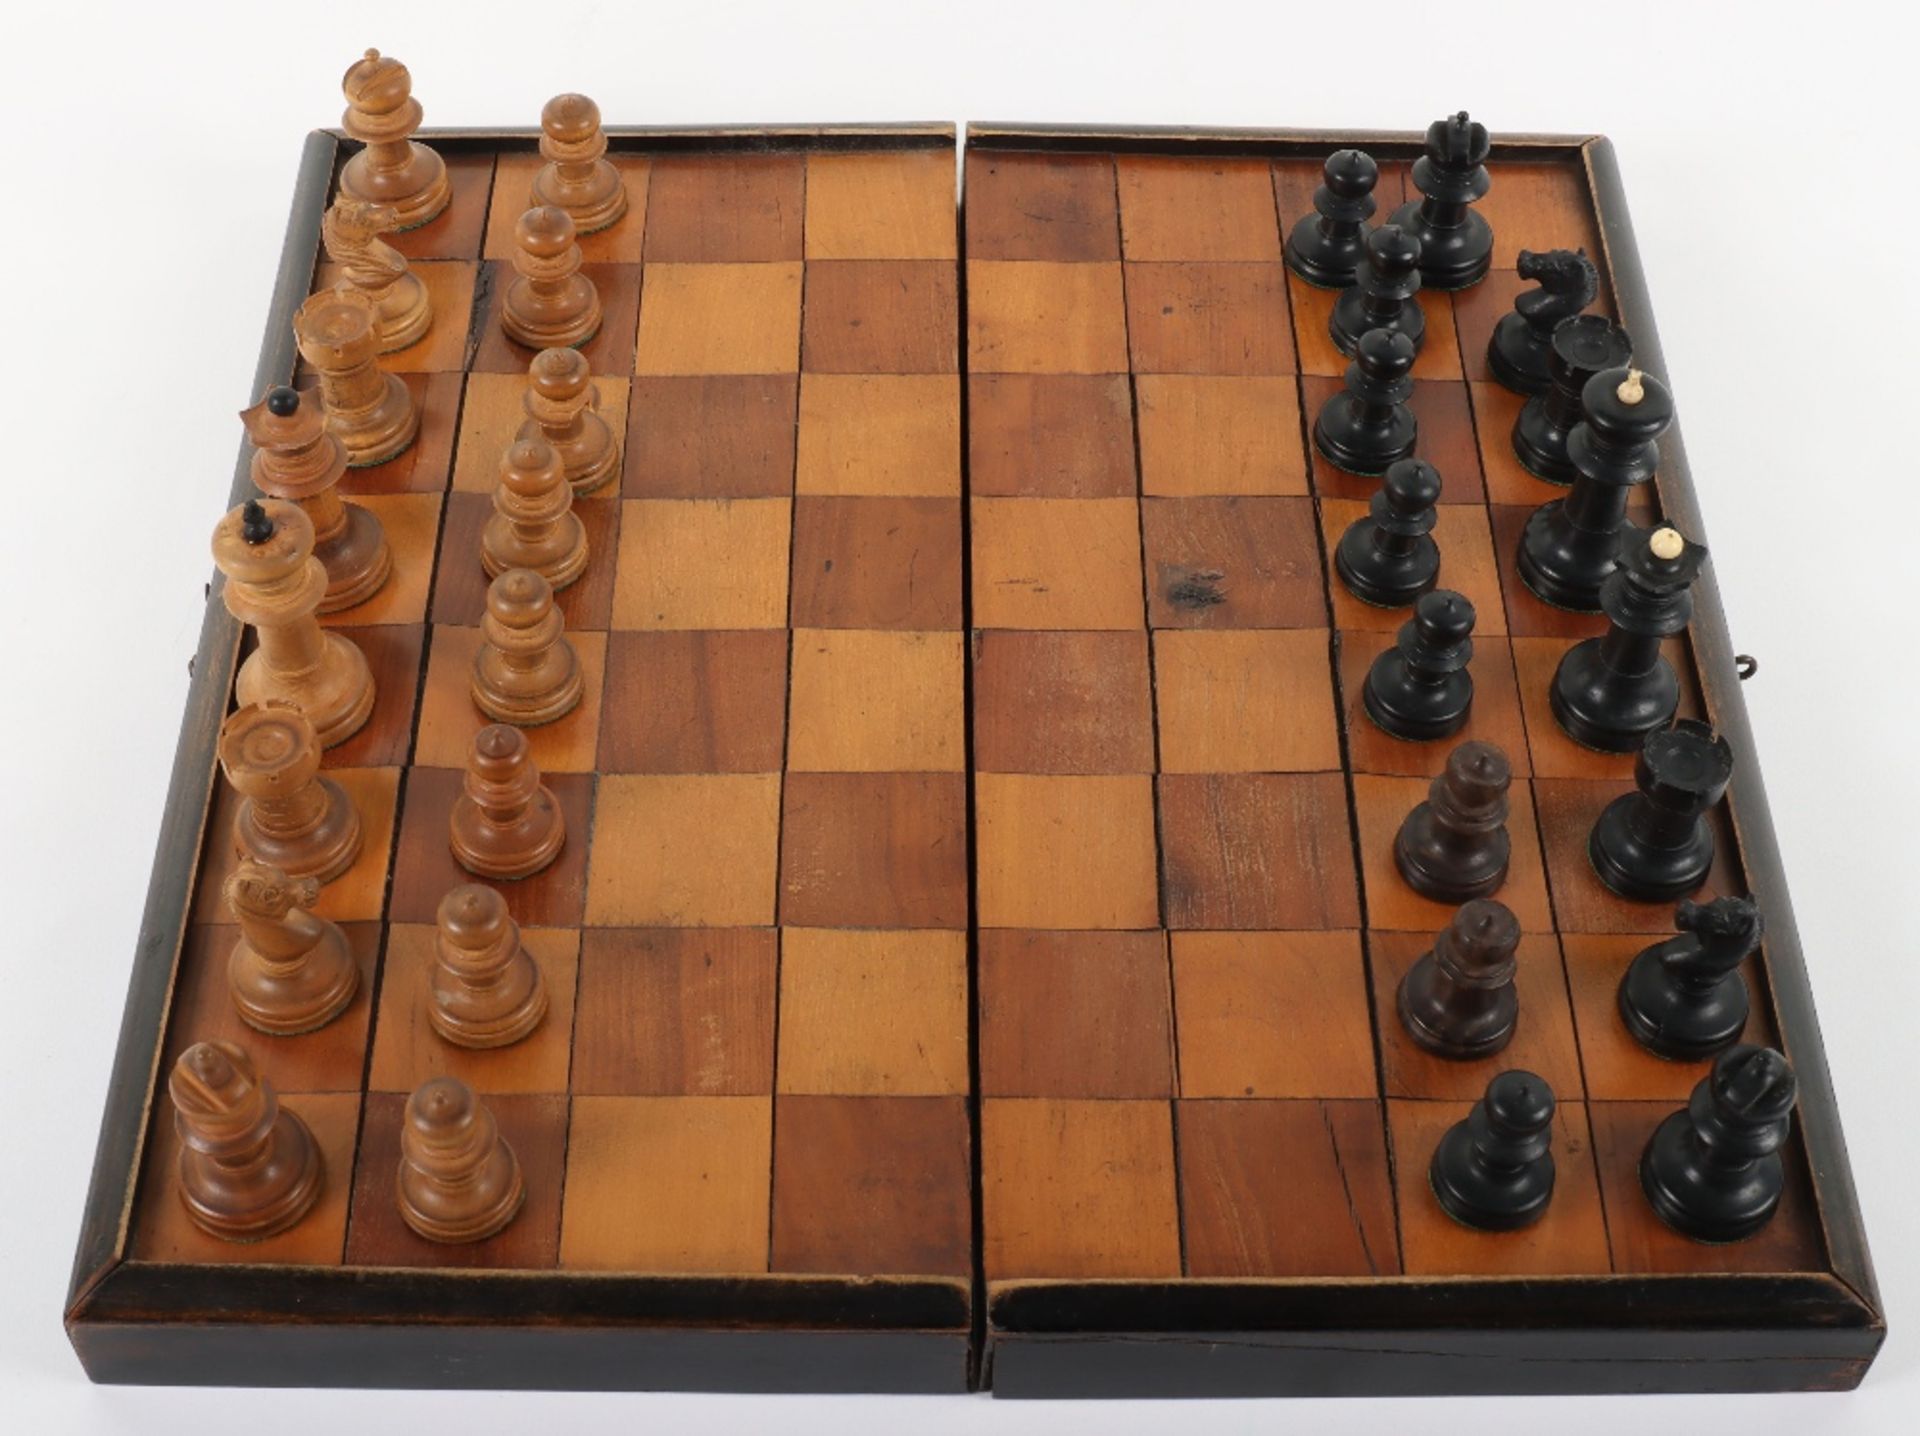 A late 19th/early 20th century chess set - Image 2 of 4